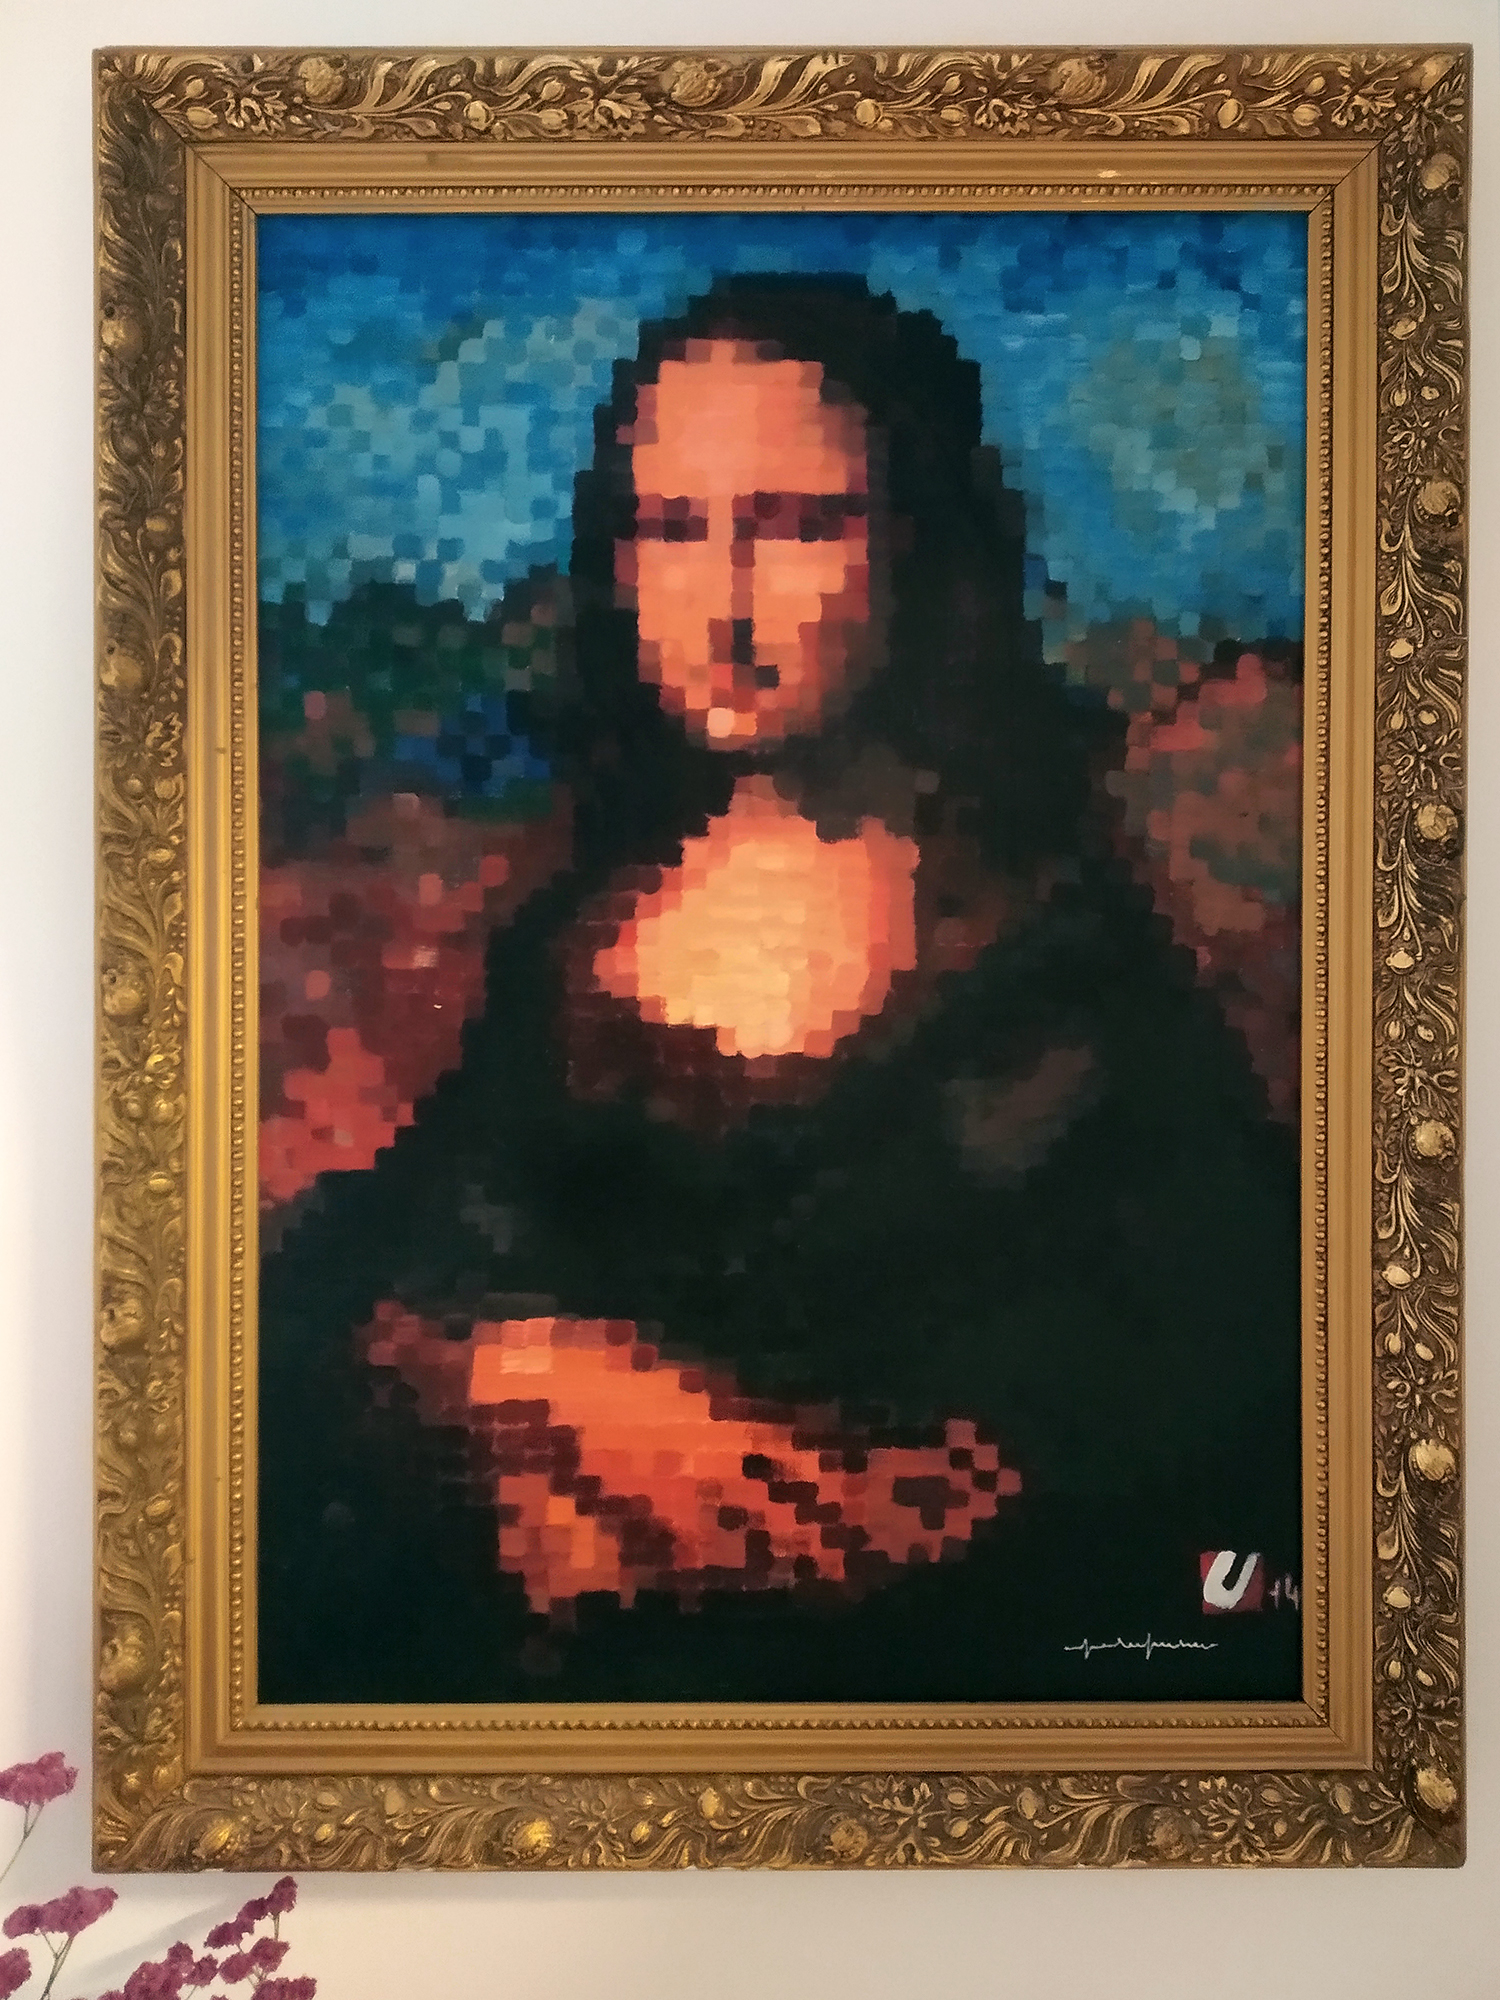 Mona Lisa in low resolution